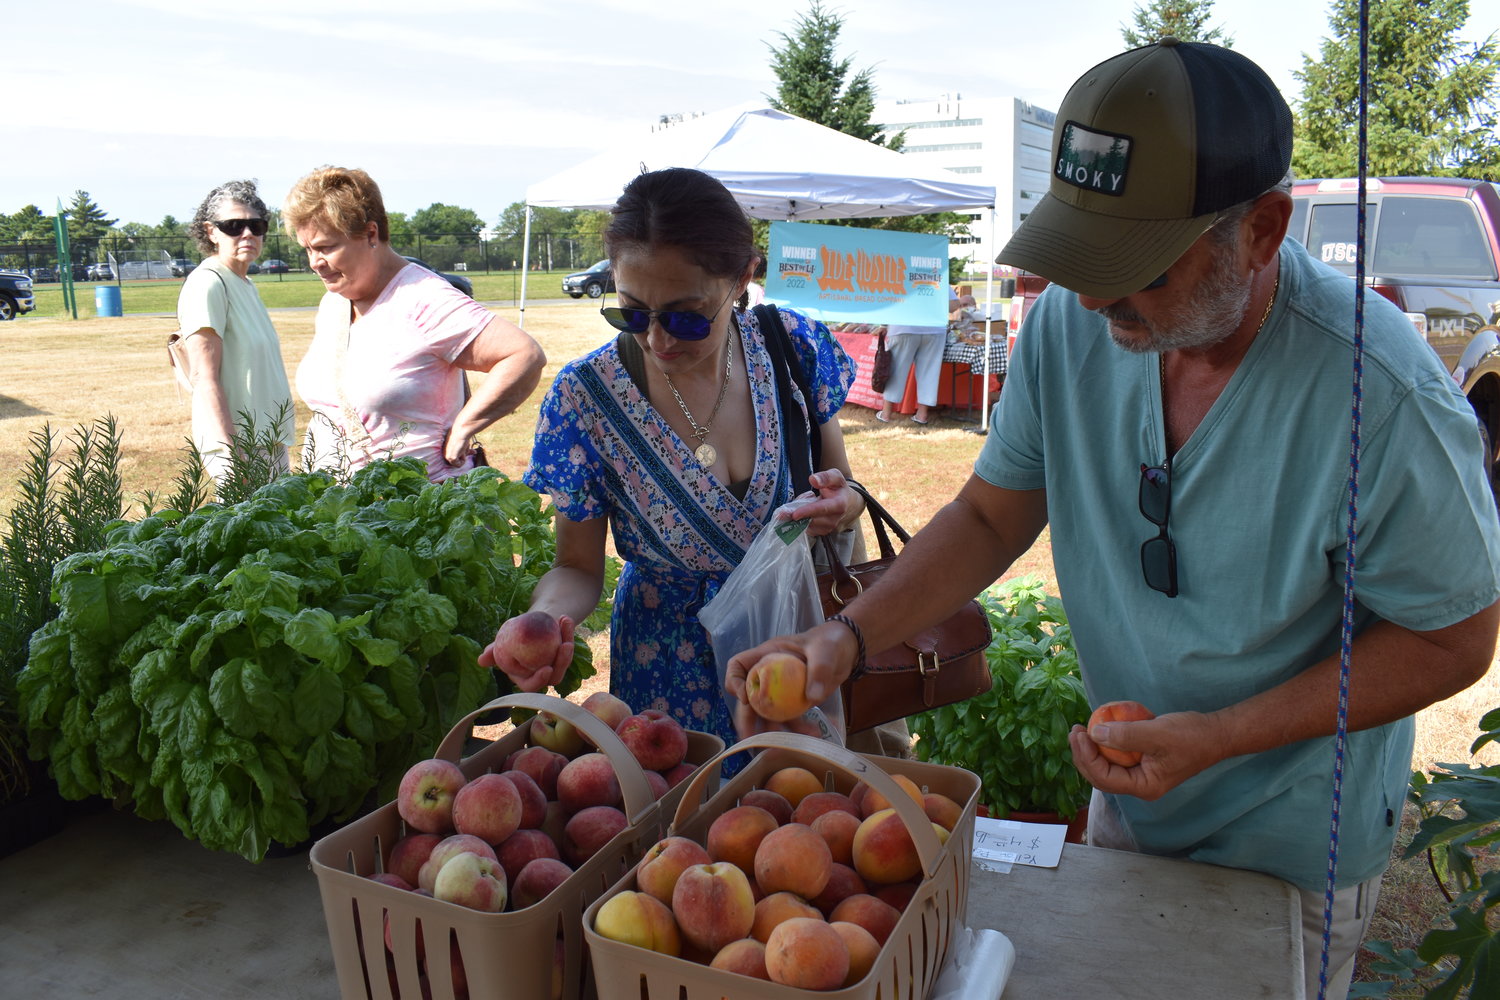 The farmers market is open to everyone and is just one of the pillars of CCE Nassau.